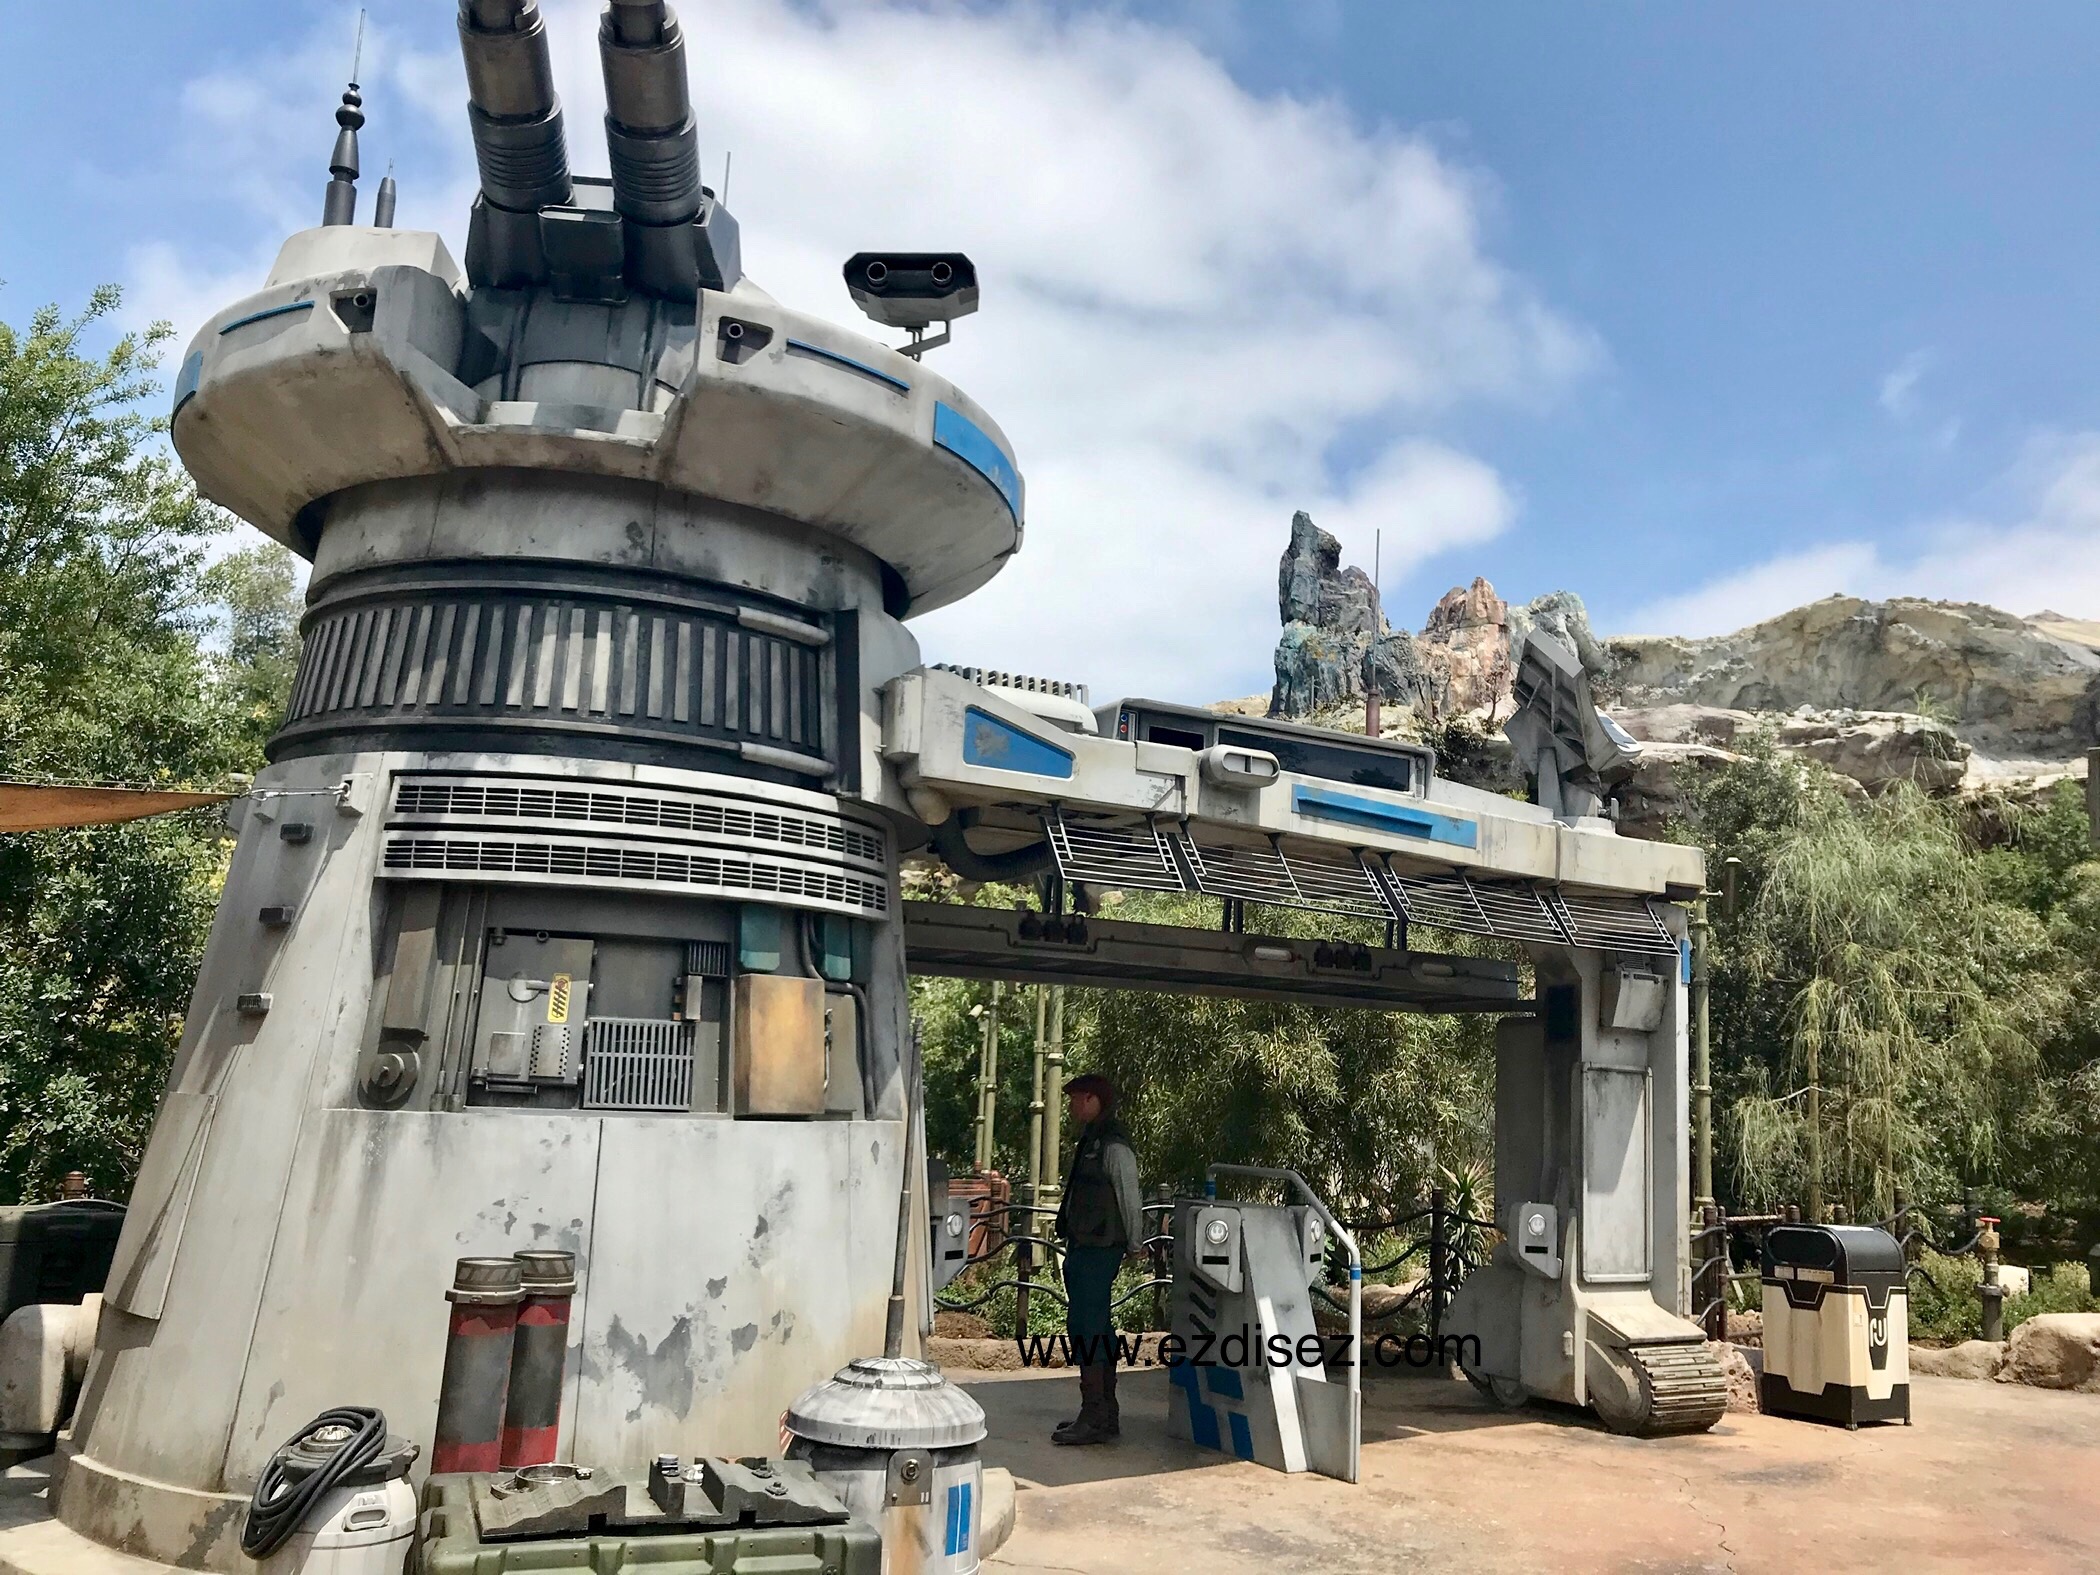 Coming Soon to Disneyland: New and Exciting Changes - Instant ...